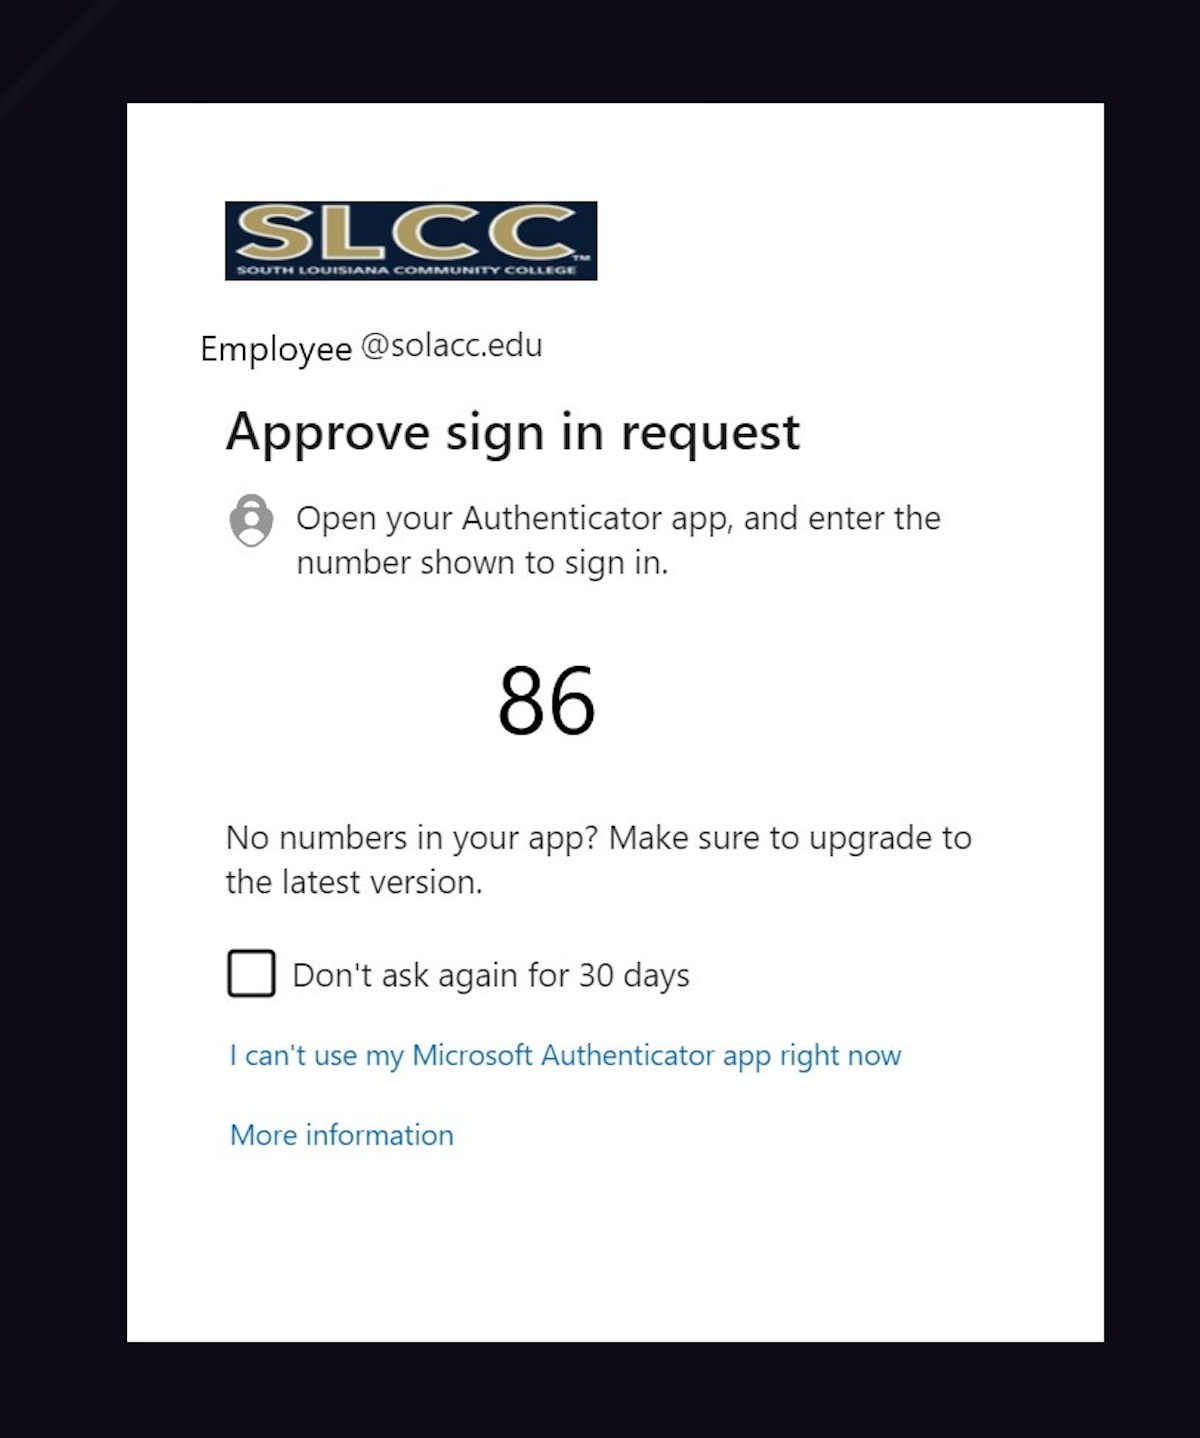 If you are using the Microsoft Authenticator application, you will now be prompted to enter a matching number when signing into Microsoft applications. 